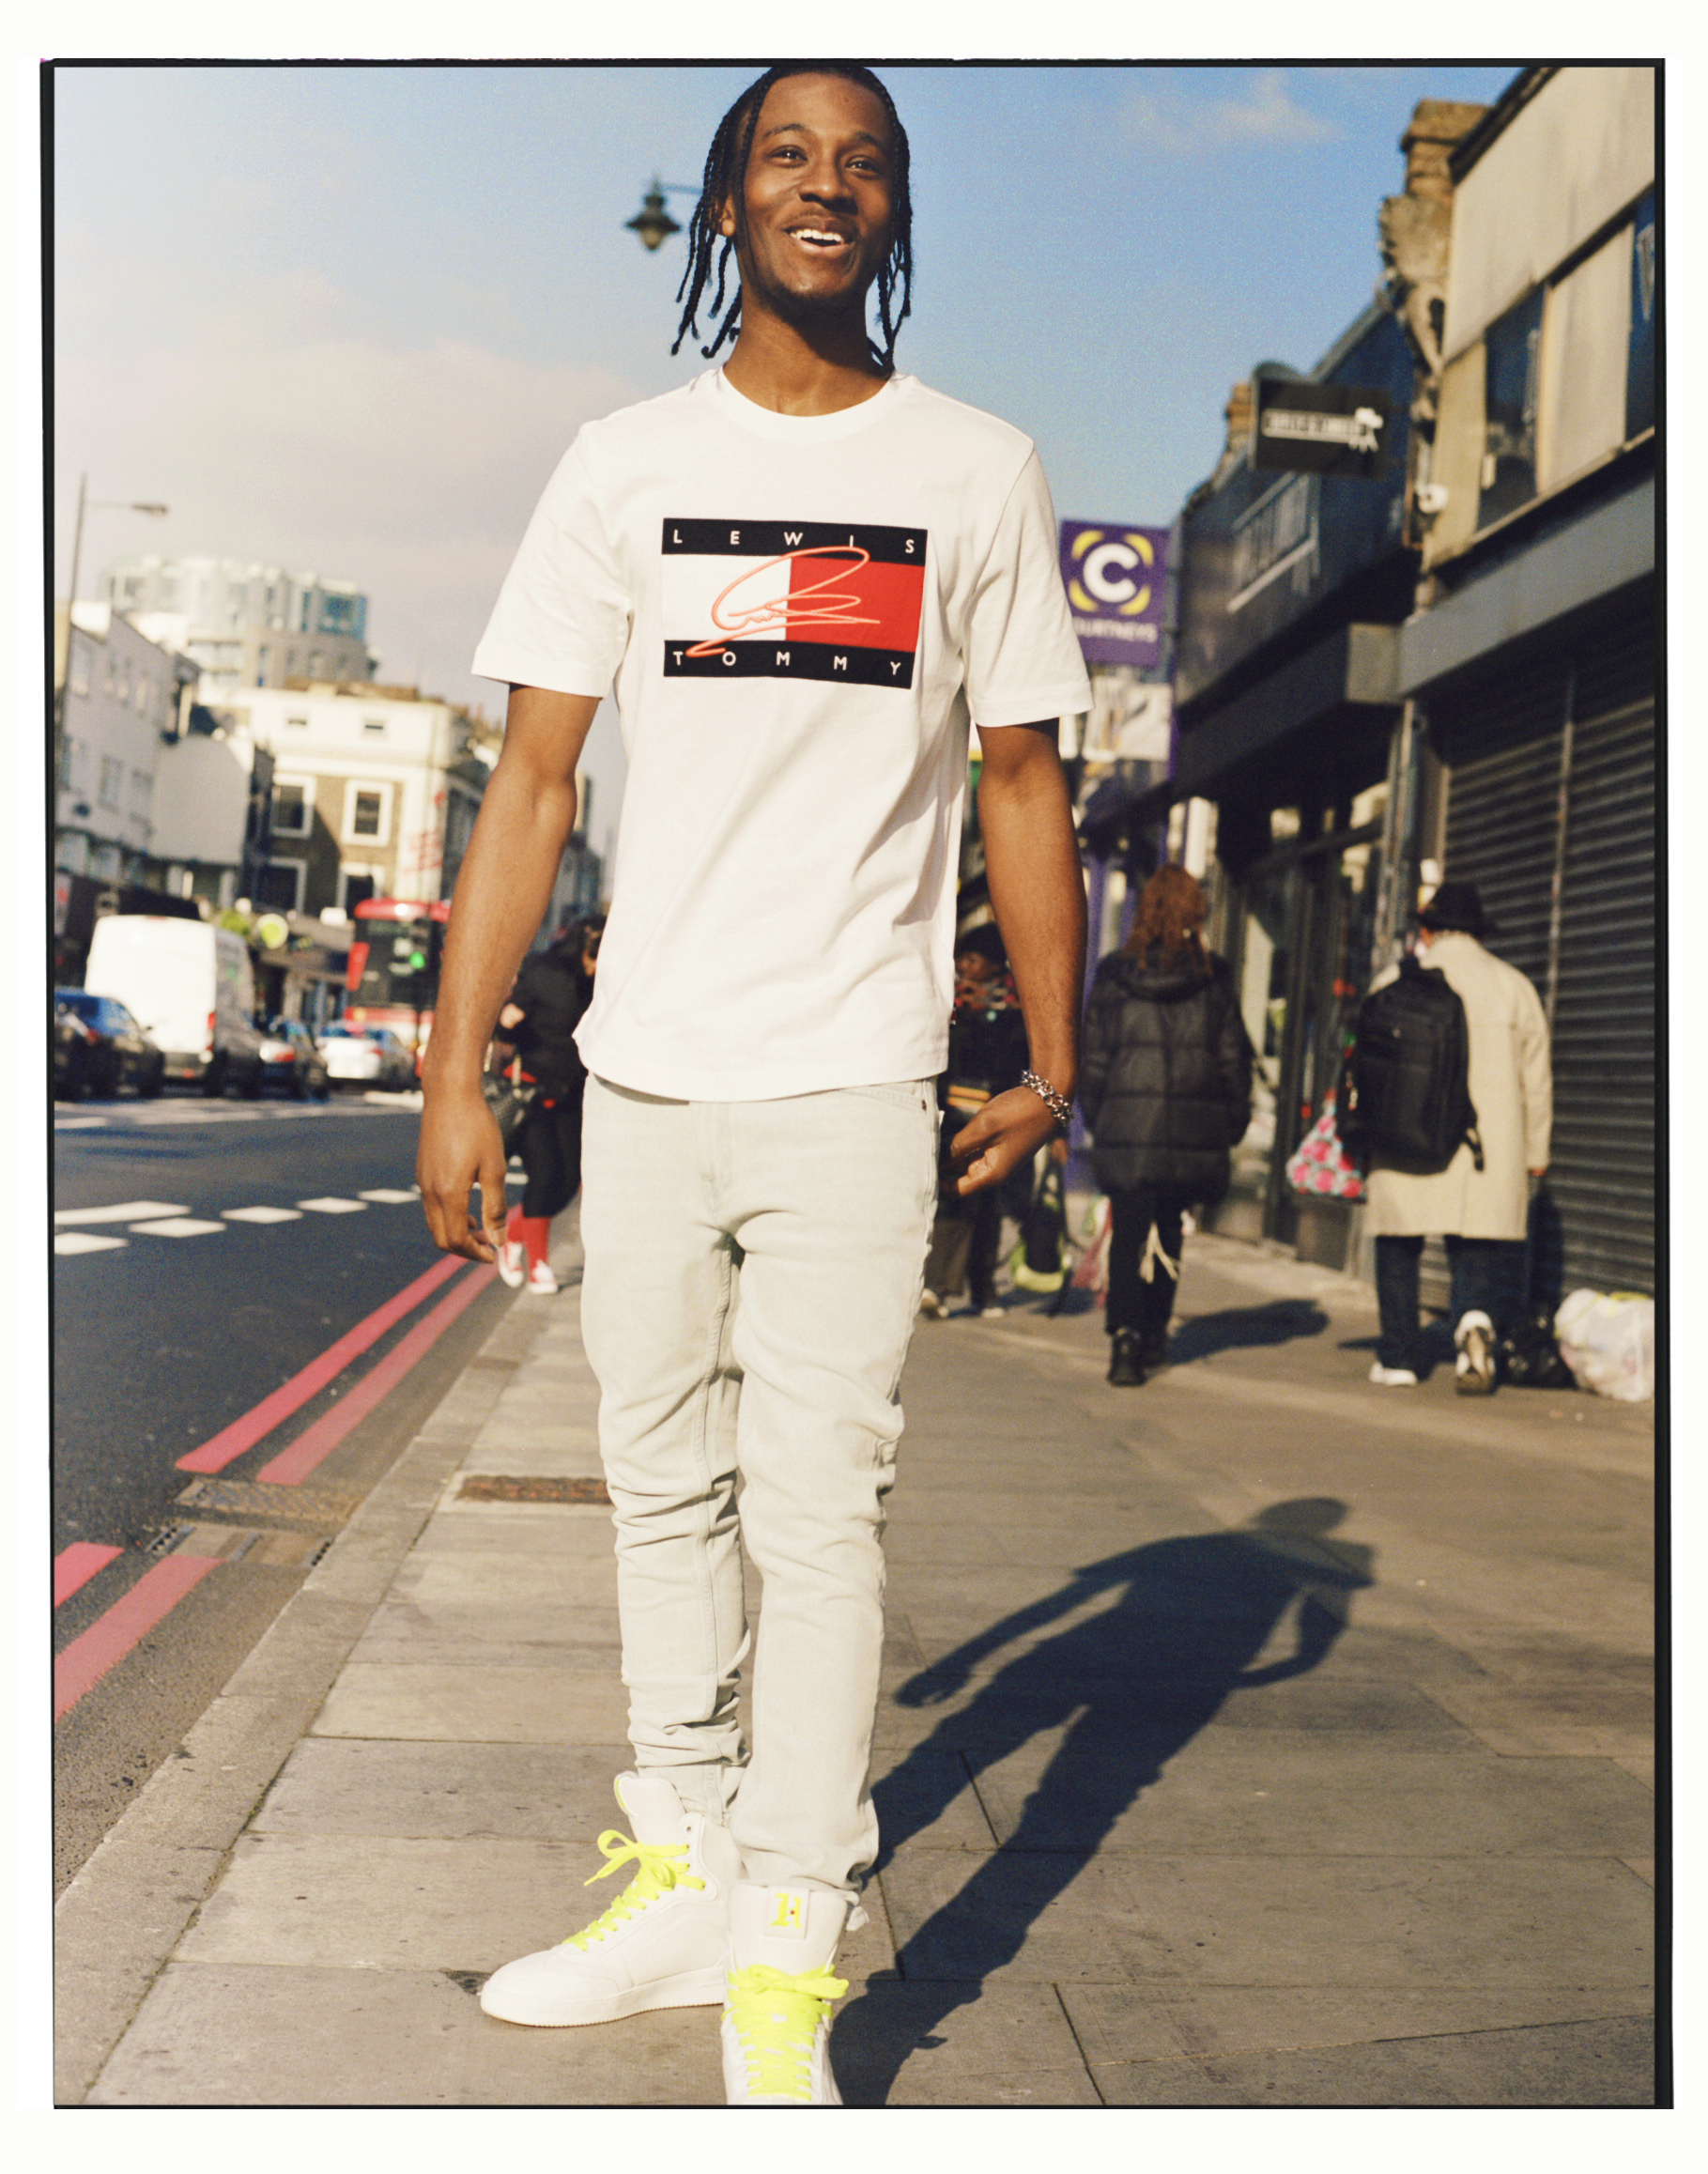 lh x tommy